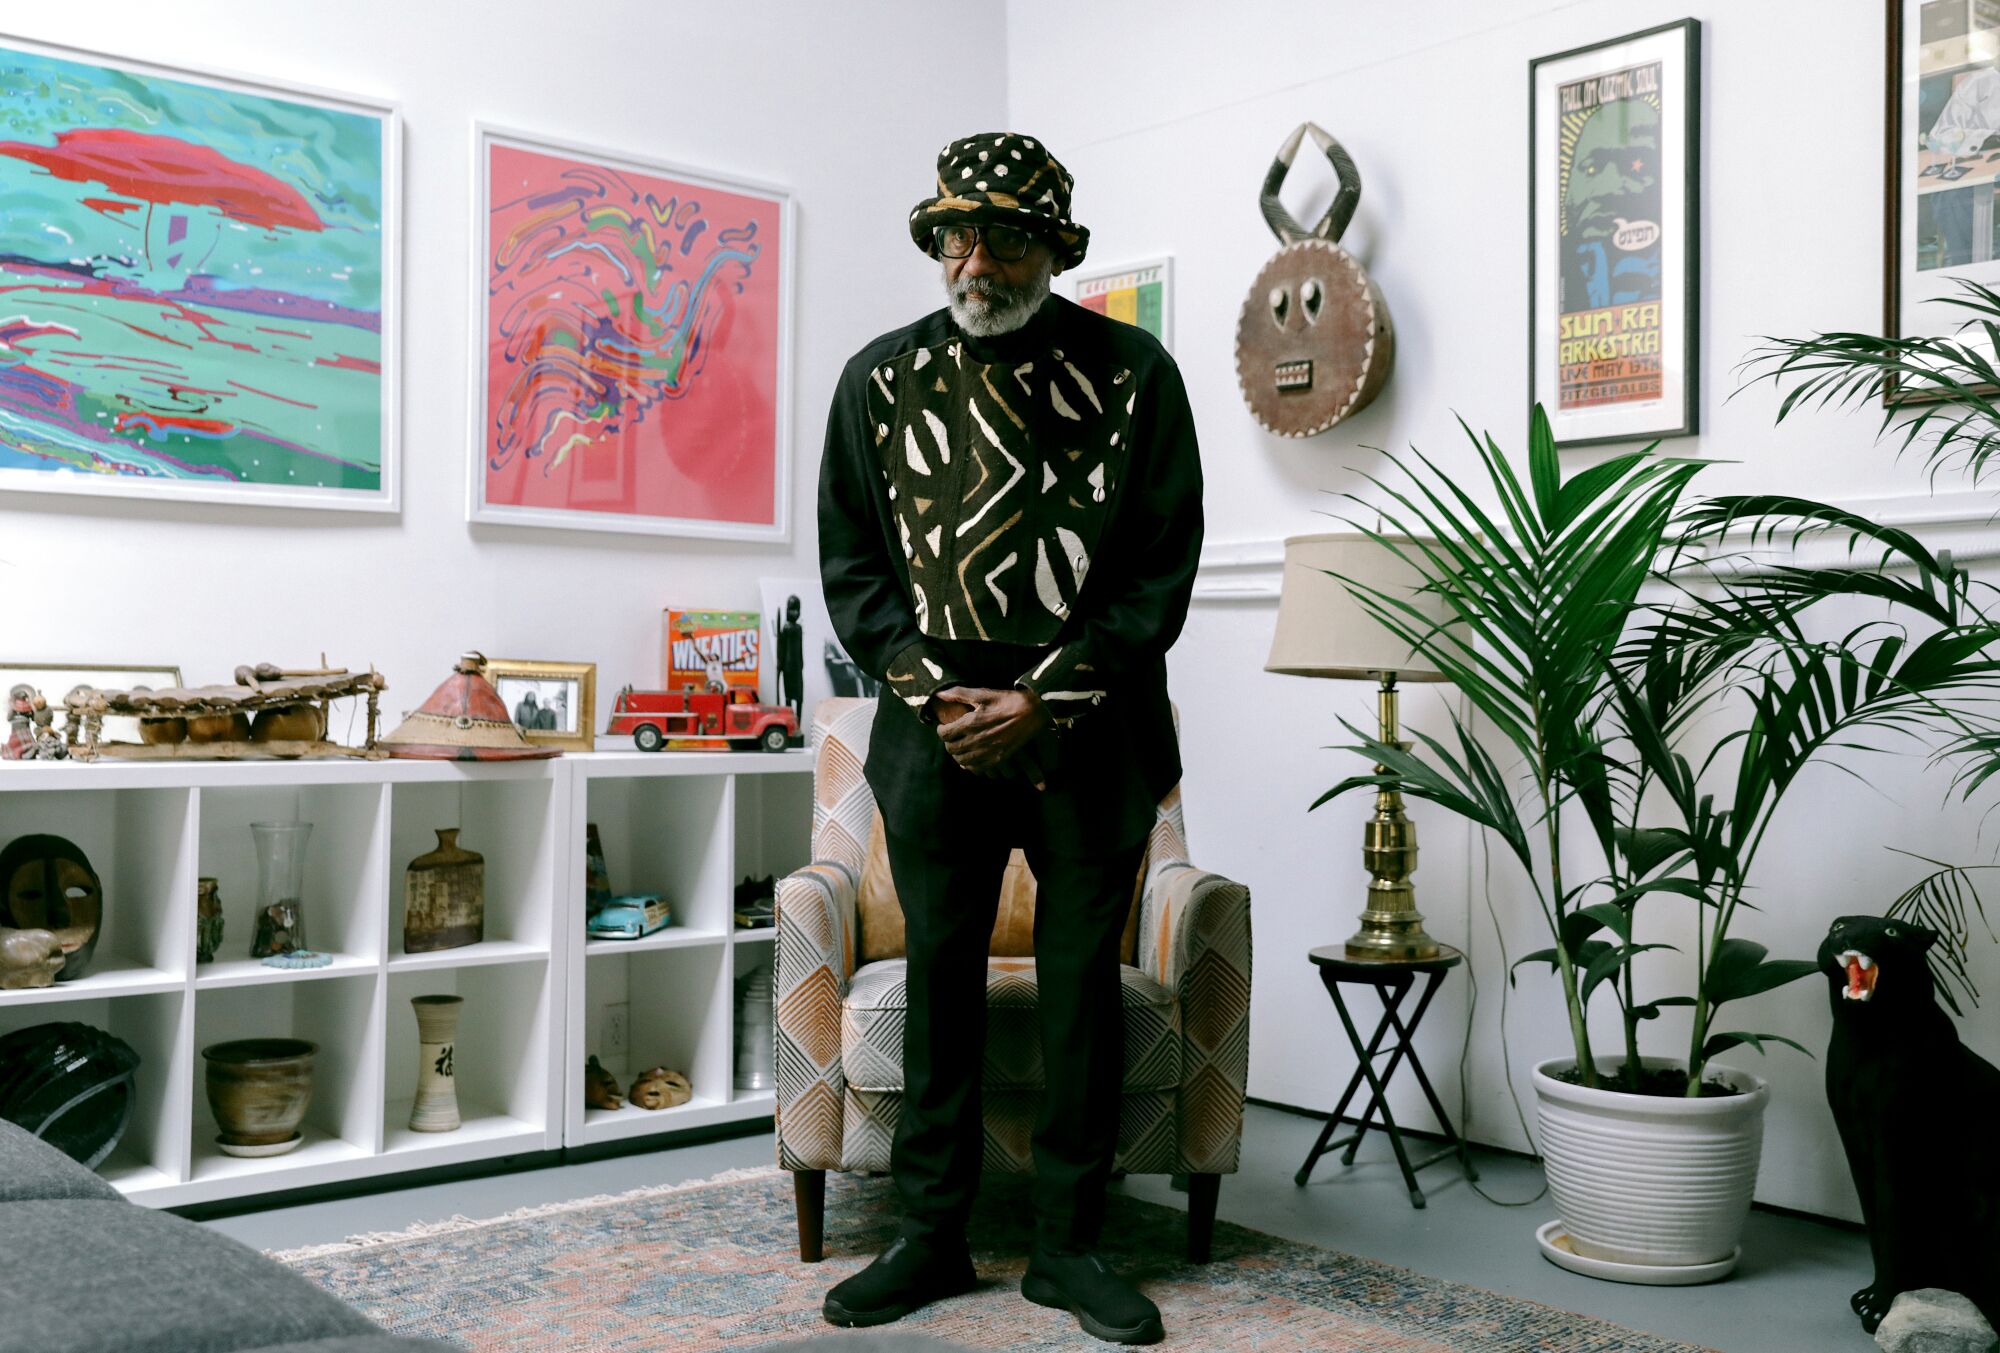 Ulysses Jenkins, dressed in a shirt with an African pattern, stands between two abstract works and an African mask.